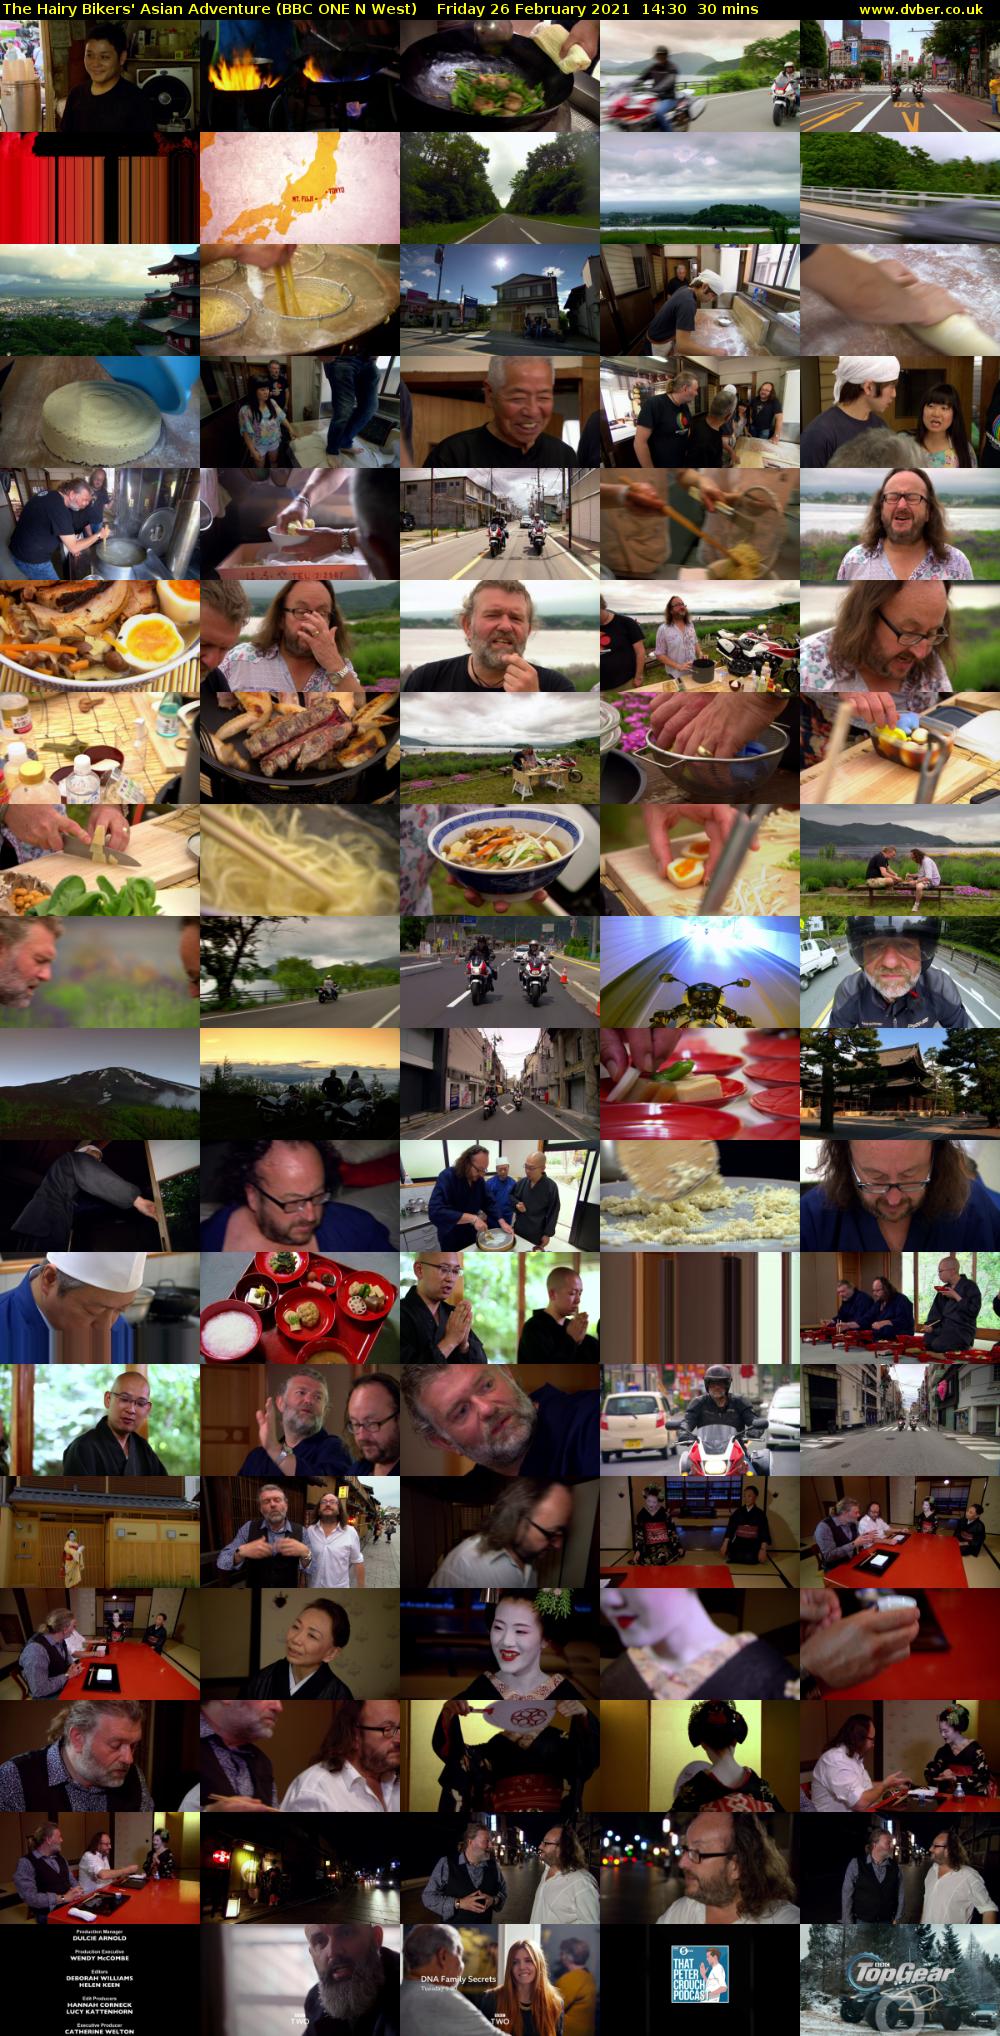 The Hairy Bikers' Asian Adventure (BBC ONE N West) Friday 26 February 2021 14:30 - 15:00